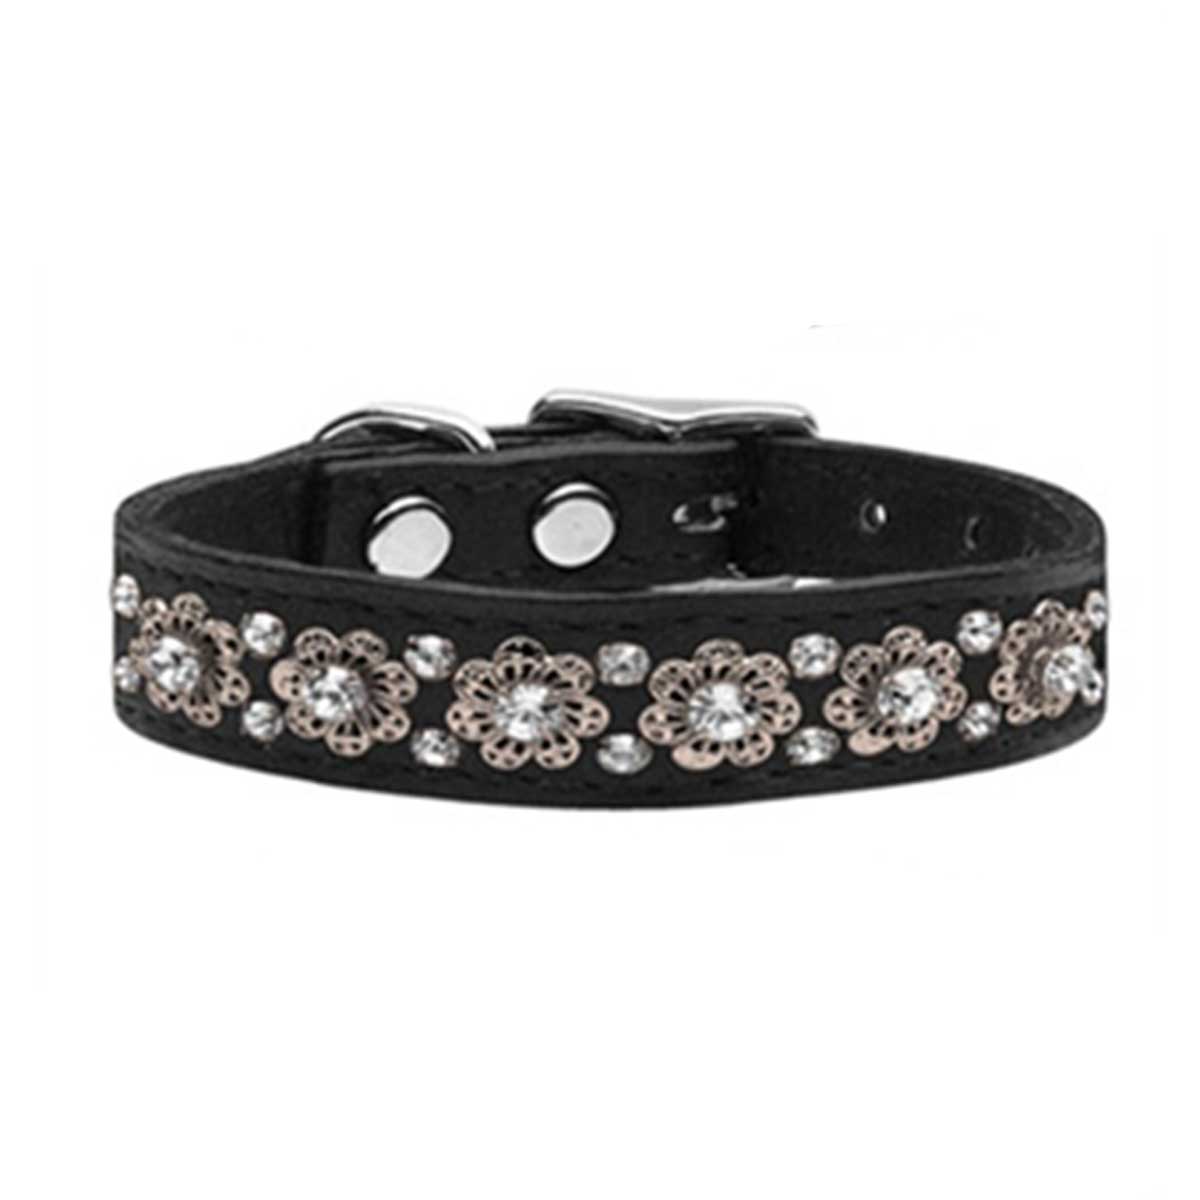 Fancy Jeweled Leather Collar in Black | Pawlicious & Company